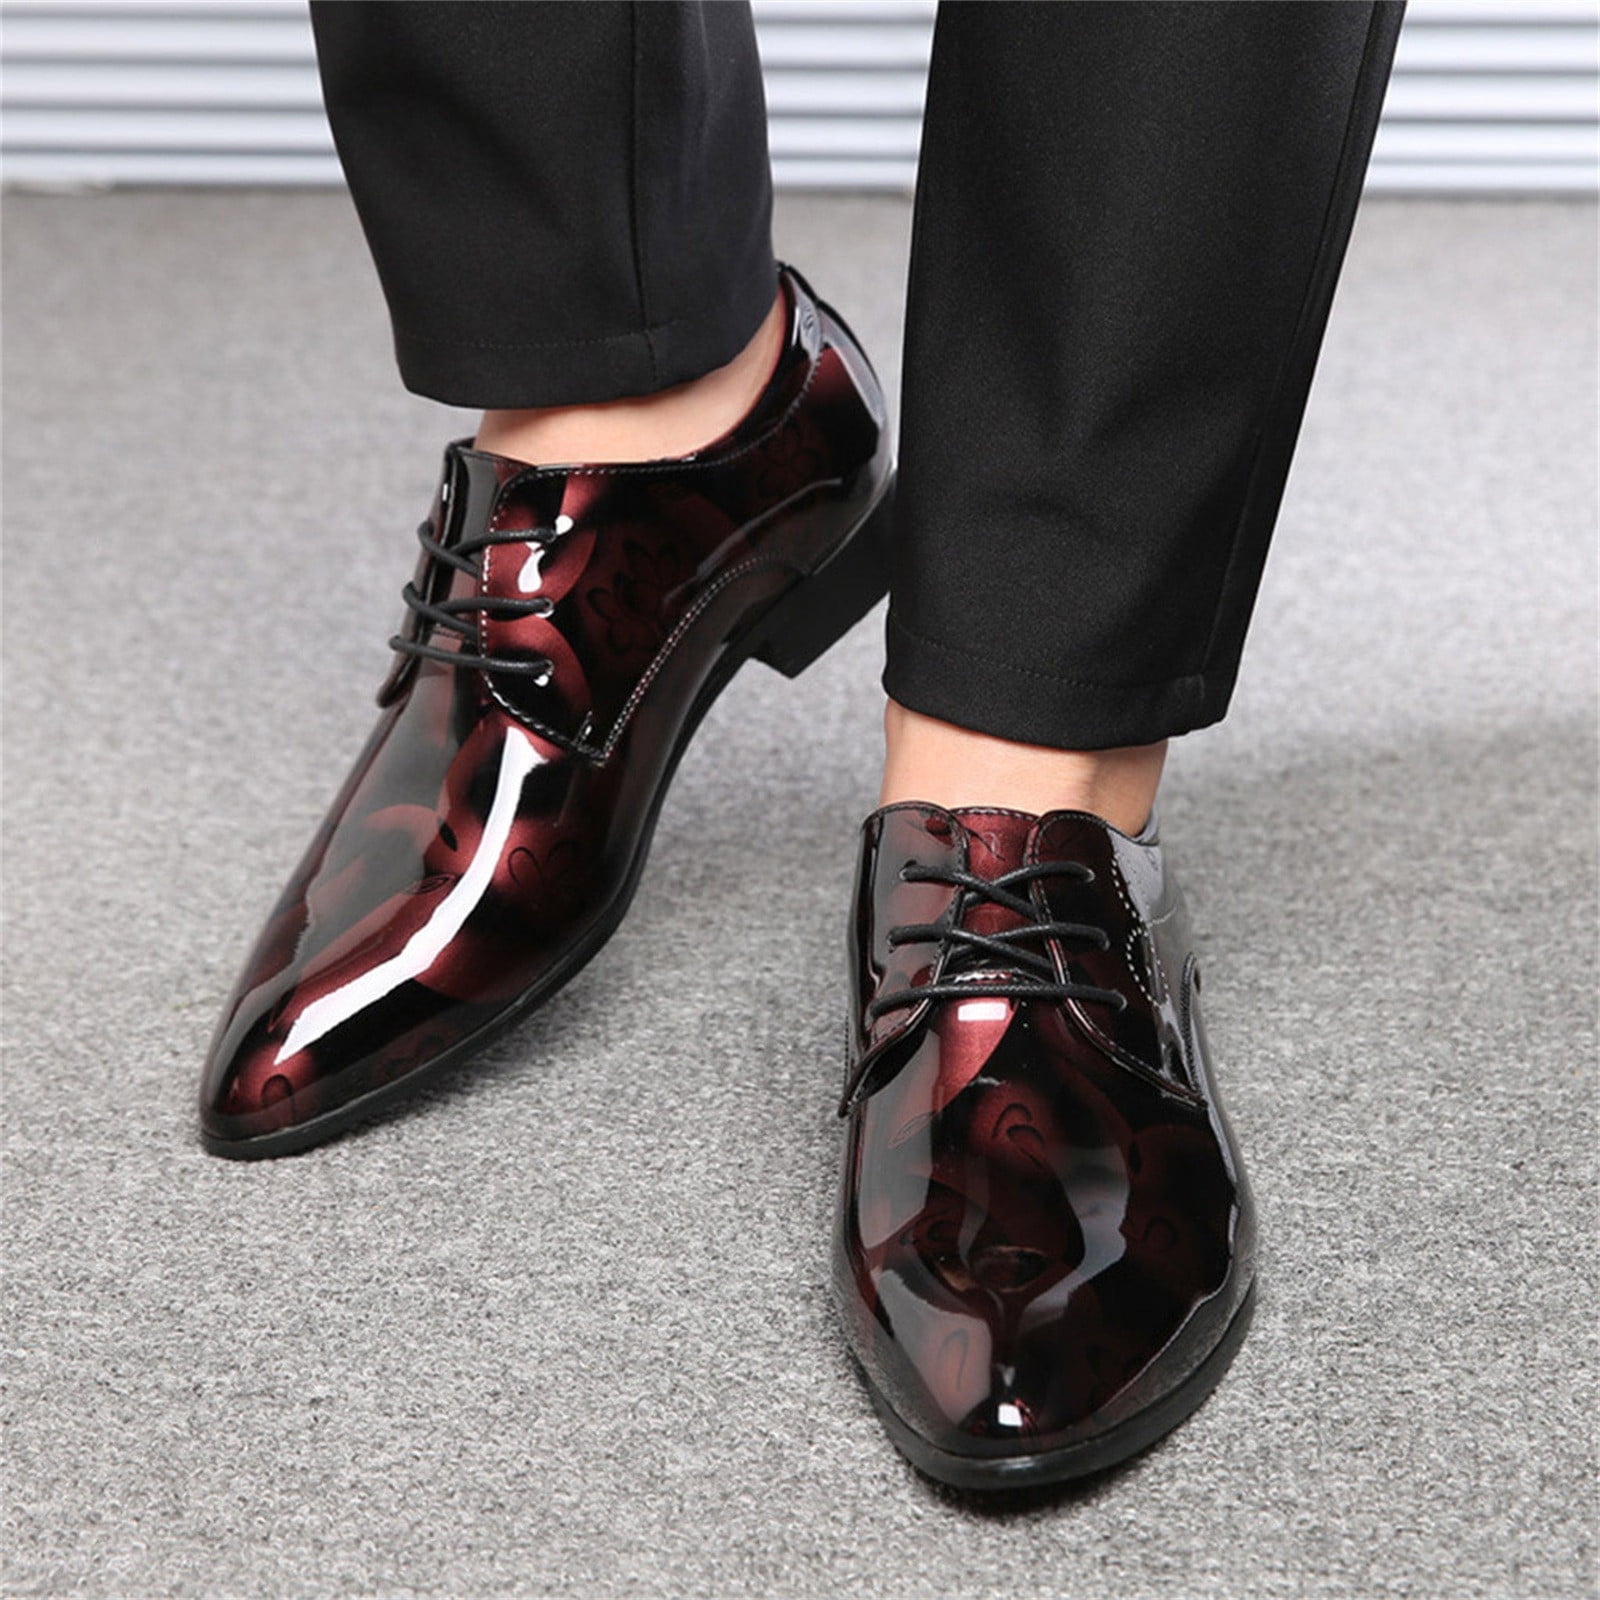 Why Pointy-Toe Shoes for Men Should Come Back in Fashion